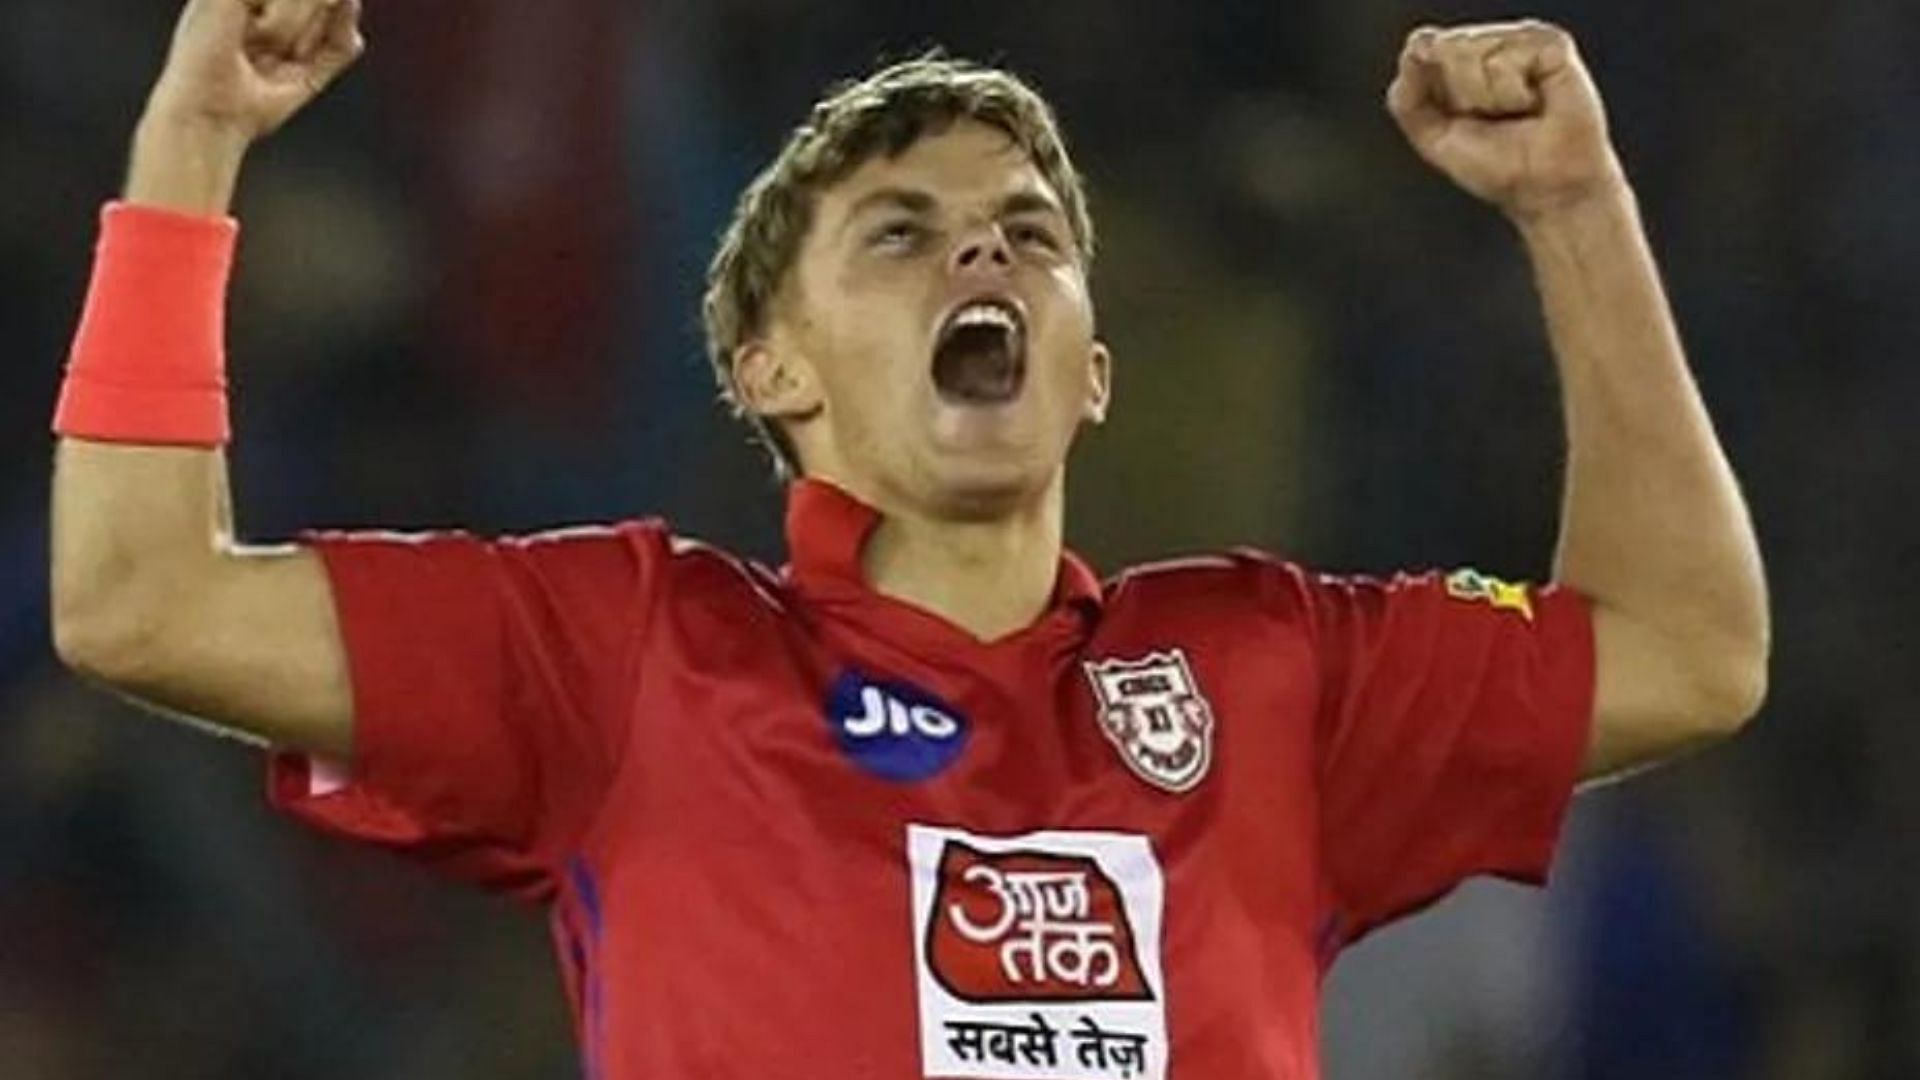 Sam Curran will once again play for the Punjab-based franchise (P.C.:iplt20.com)